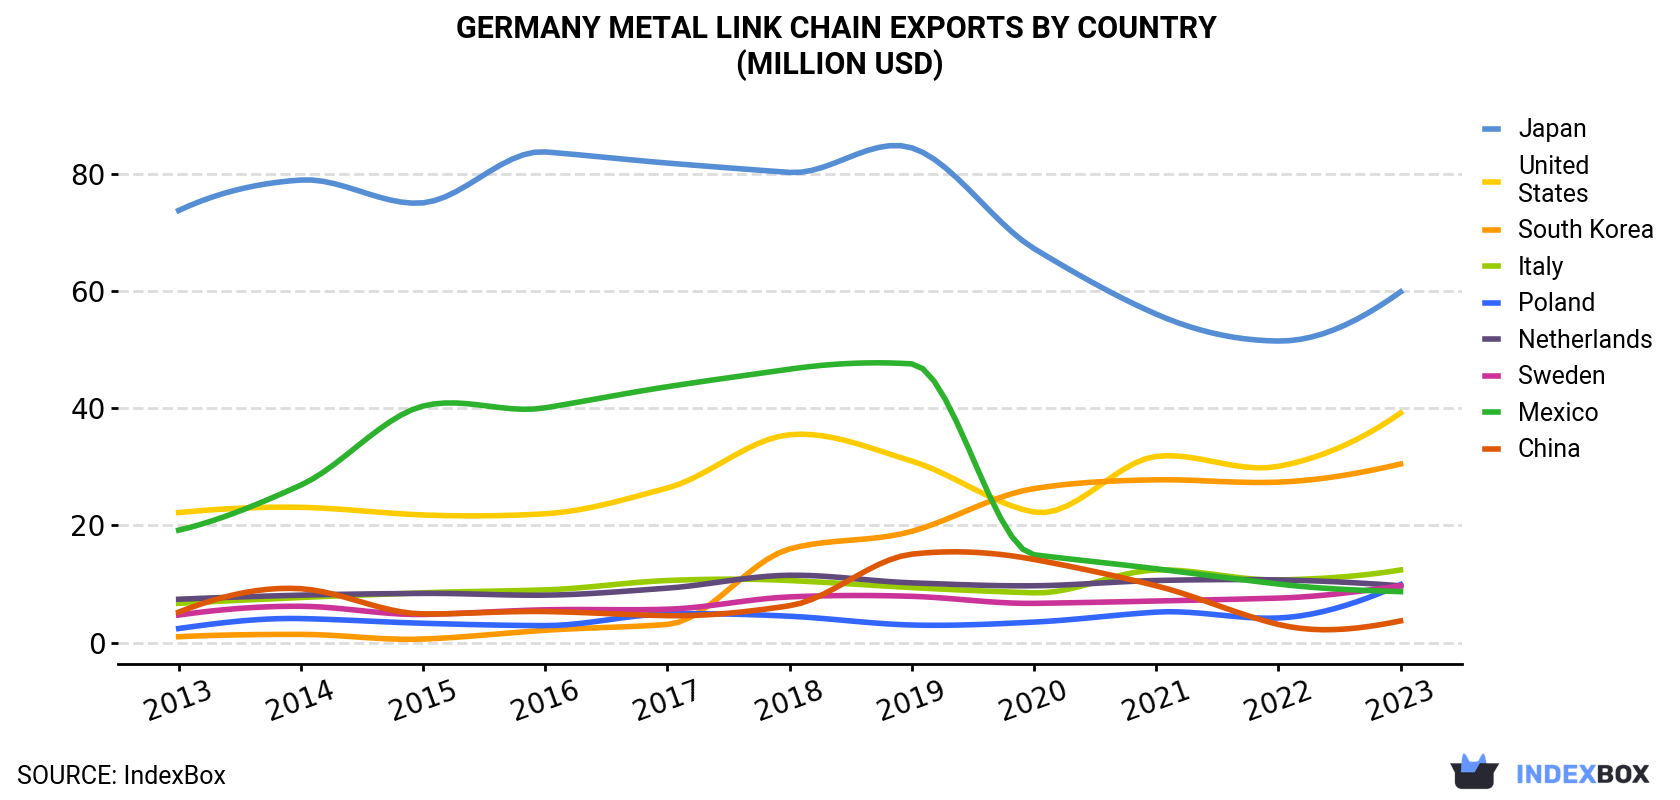 Germany Metal Link Chain Exports By Country (Million USD)